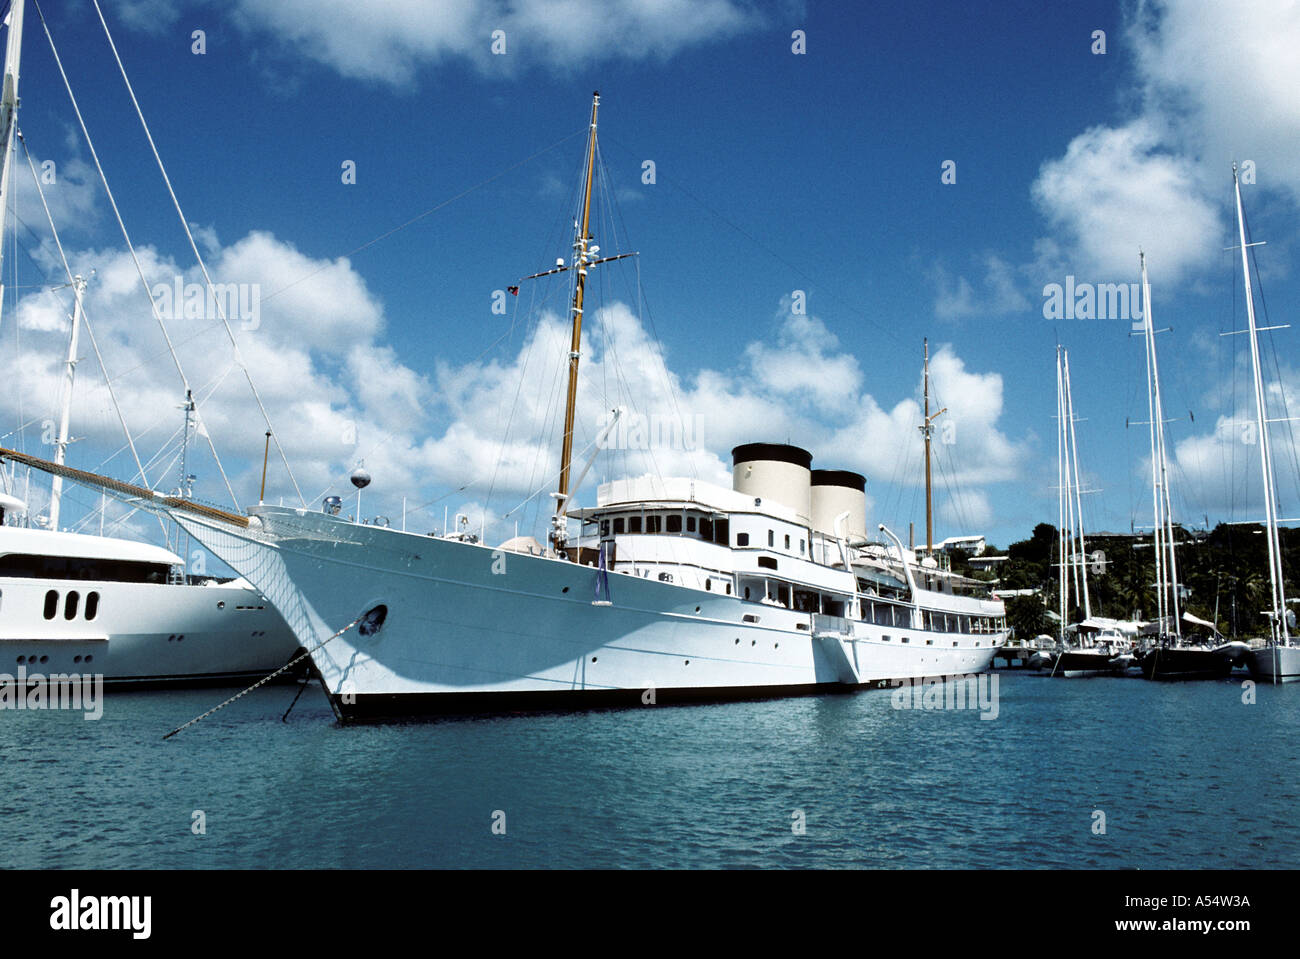 Luxury Cruiser Falmouth Harbour, Antigua Banque D'Images